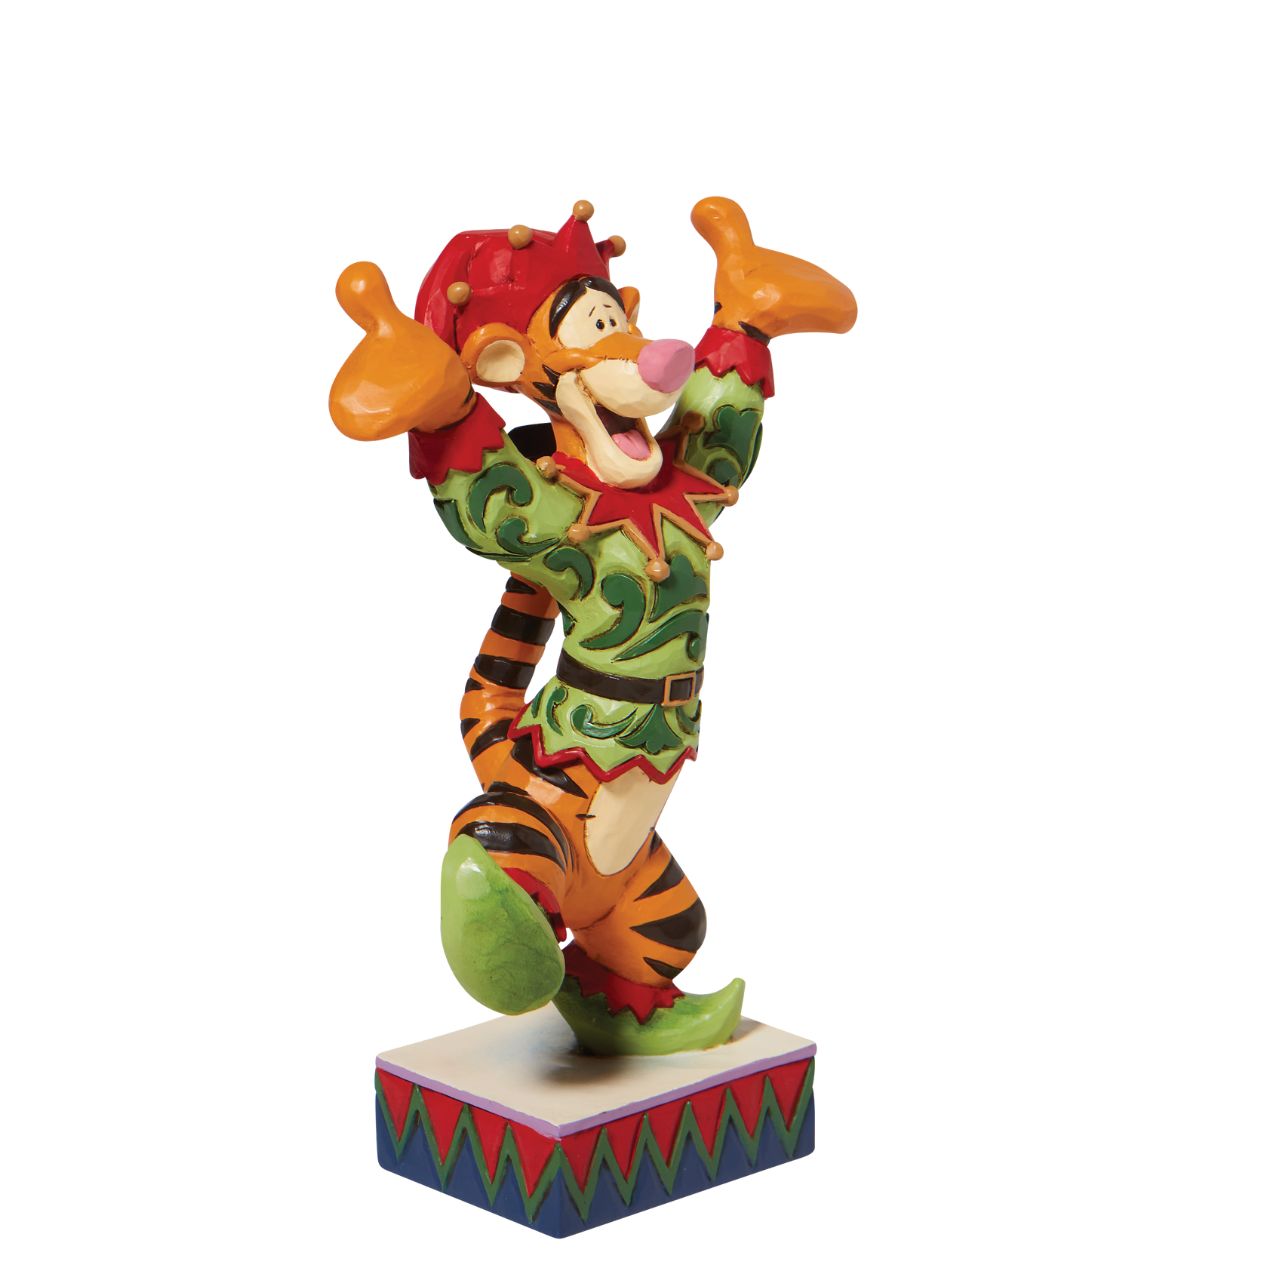 Ecstatic Elf Tigger Elf Figurine by Jim Shore  It's the most wonderful time of the year, and Tigger is ready to tell you the most wonderful thing about everything this holiday season. Jubilant and jolly the striped jester wears an elf costume with a broad smile in this Disney by Jim Shore classic.